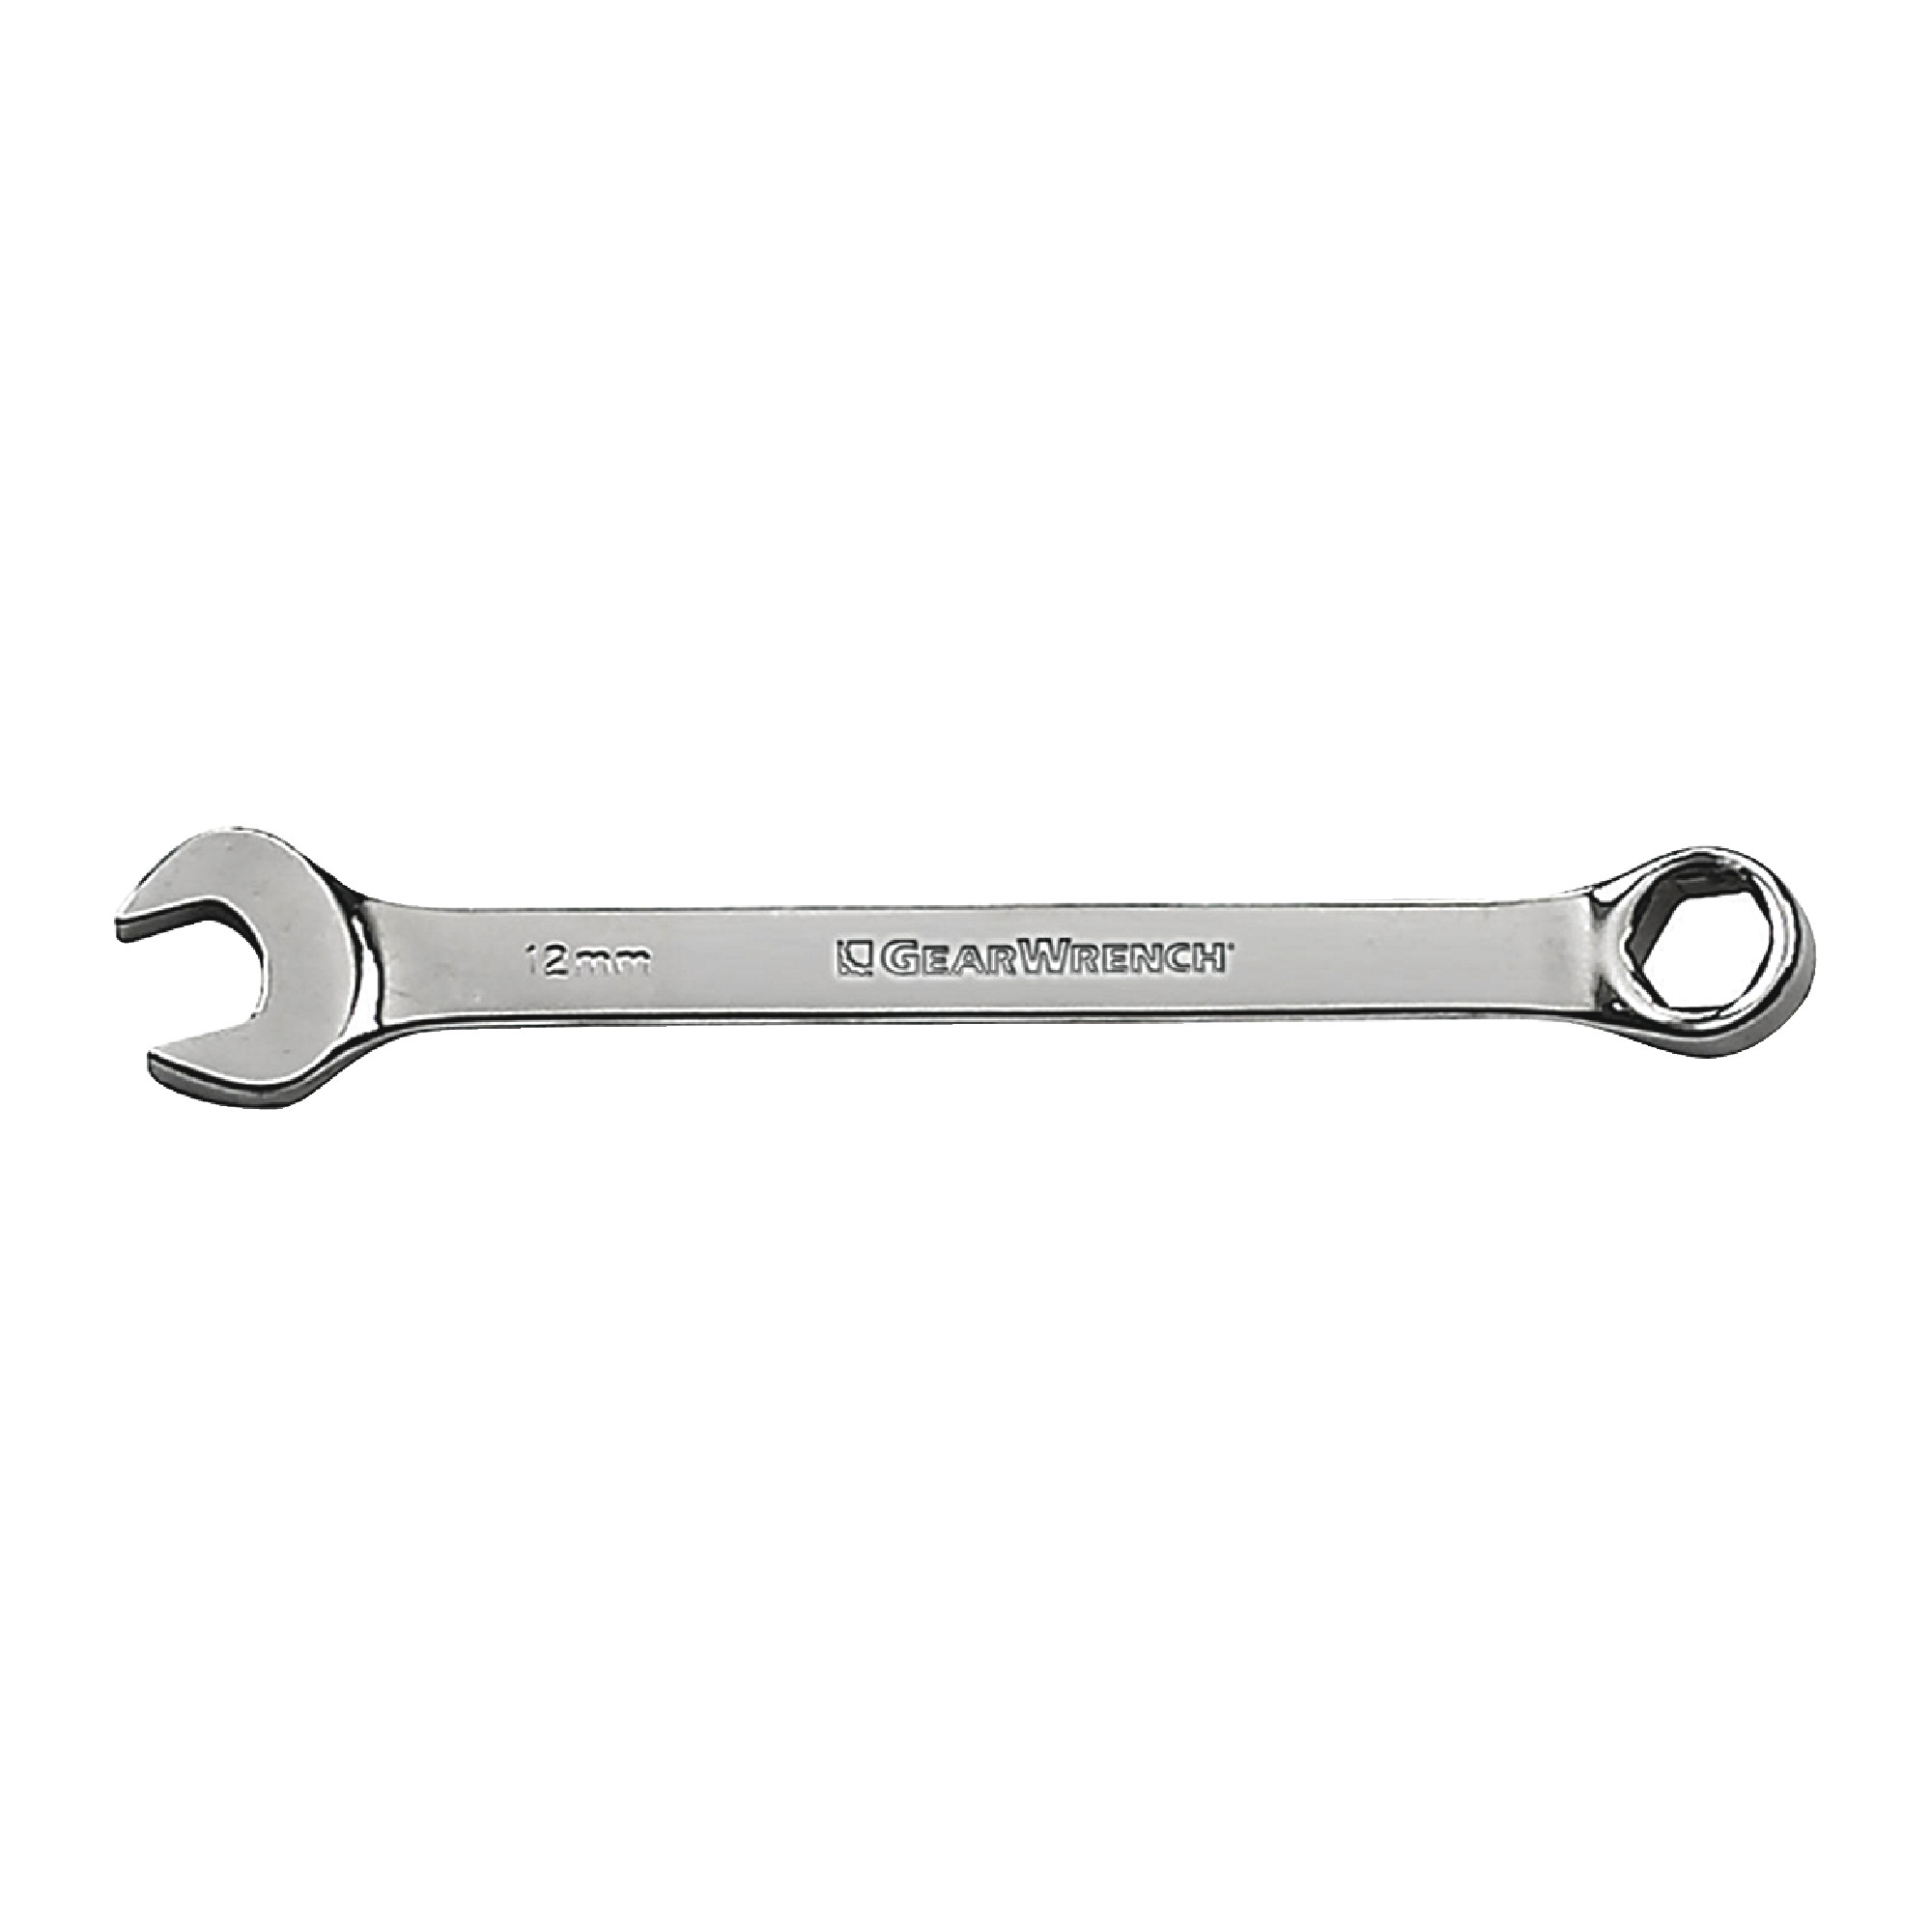 8mm 6 Point Combination Wrench